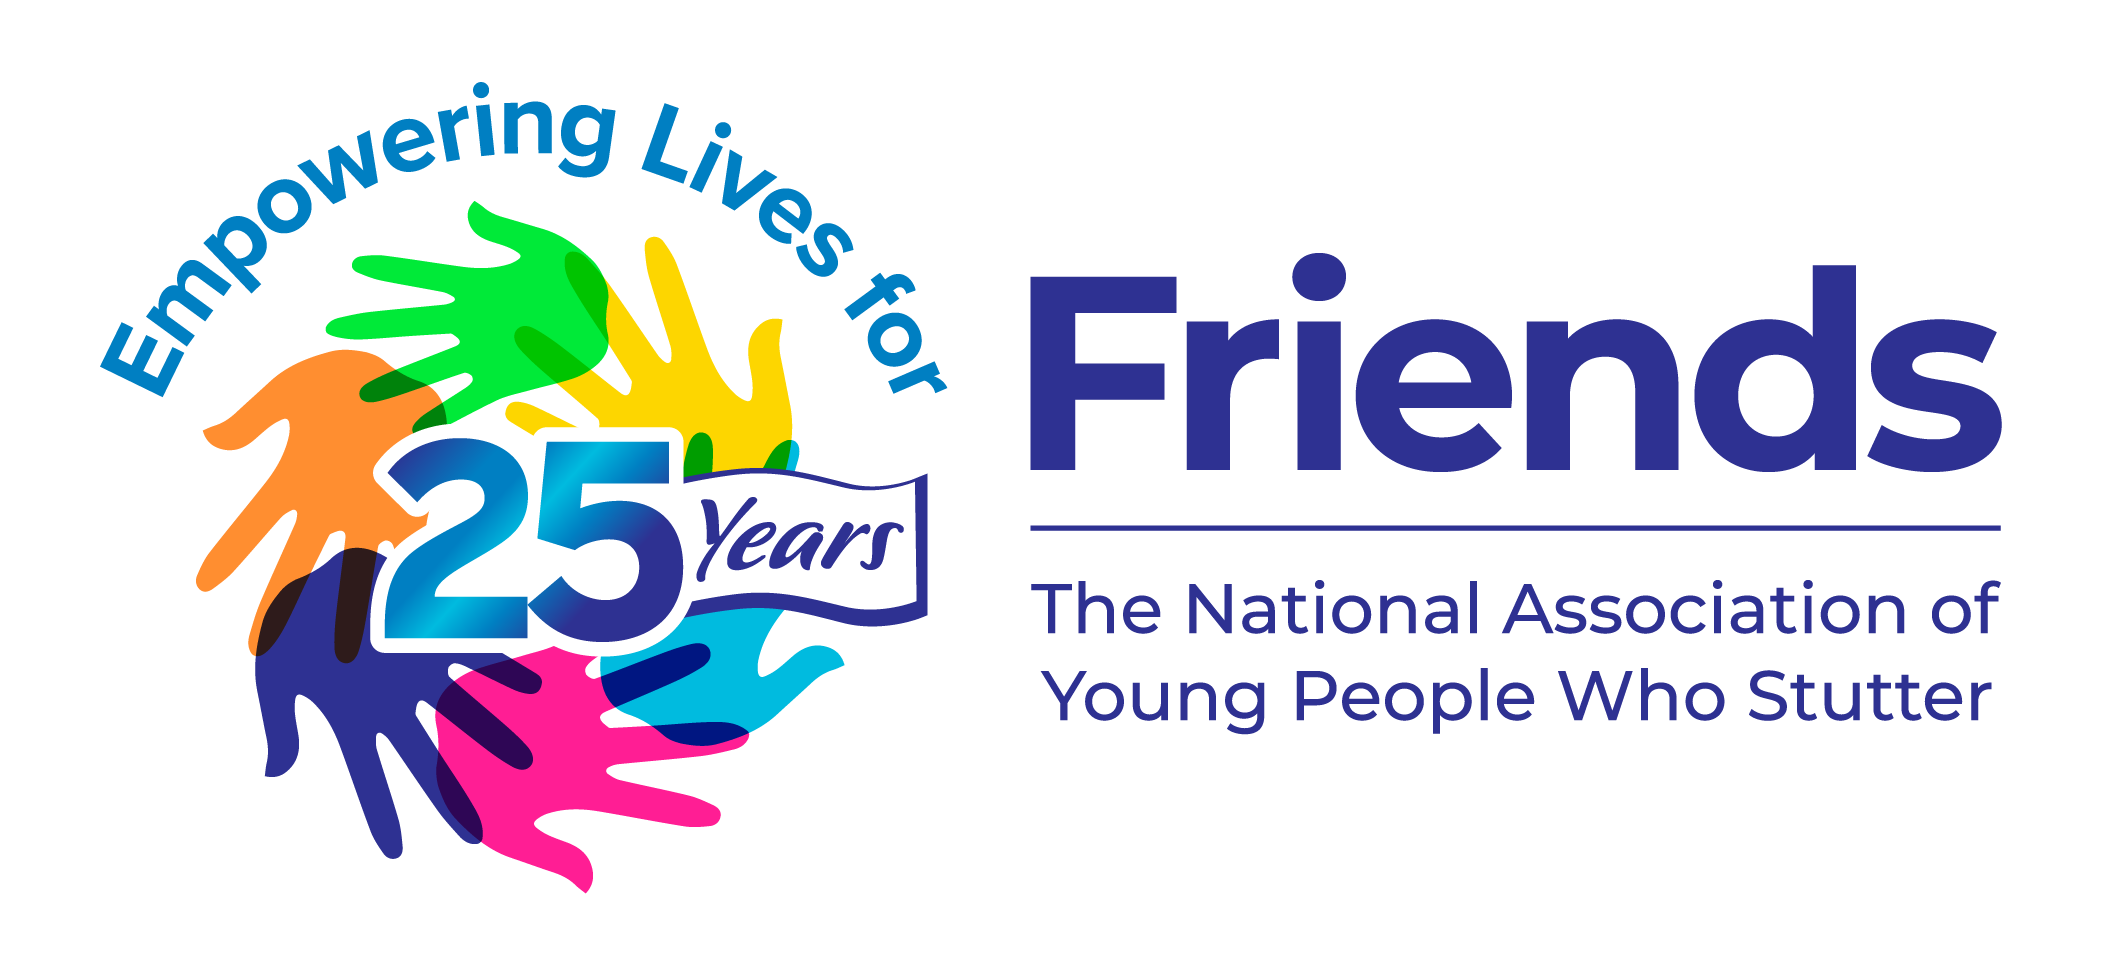 FRIENDS: The National Association of Young People Who Stutter